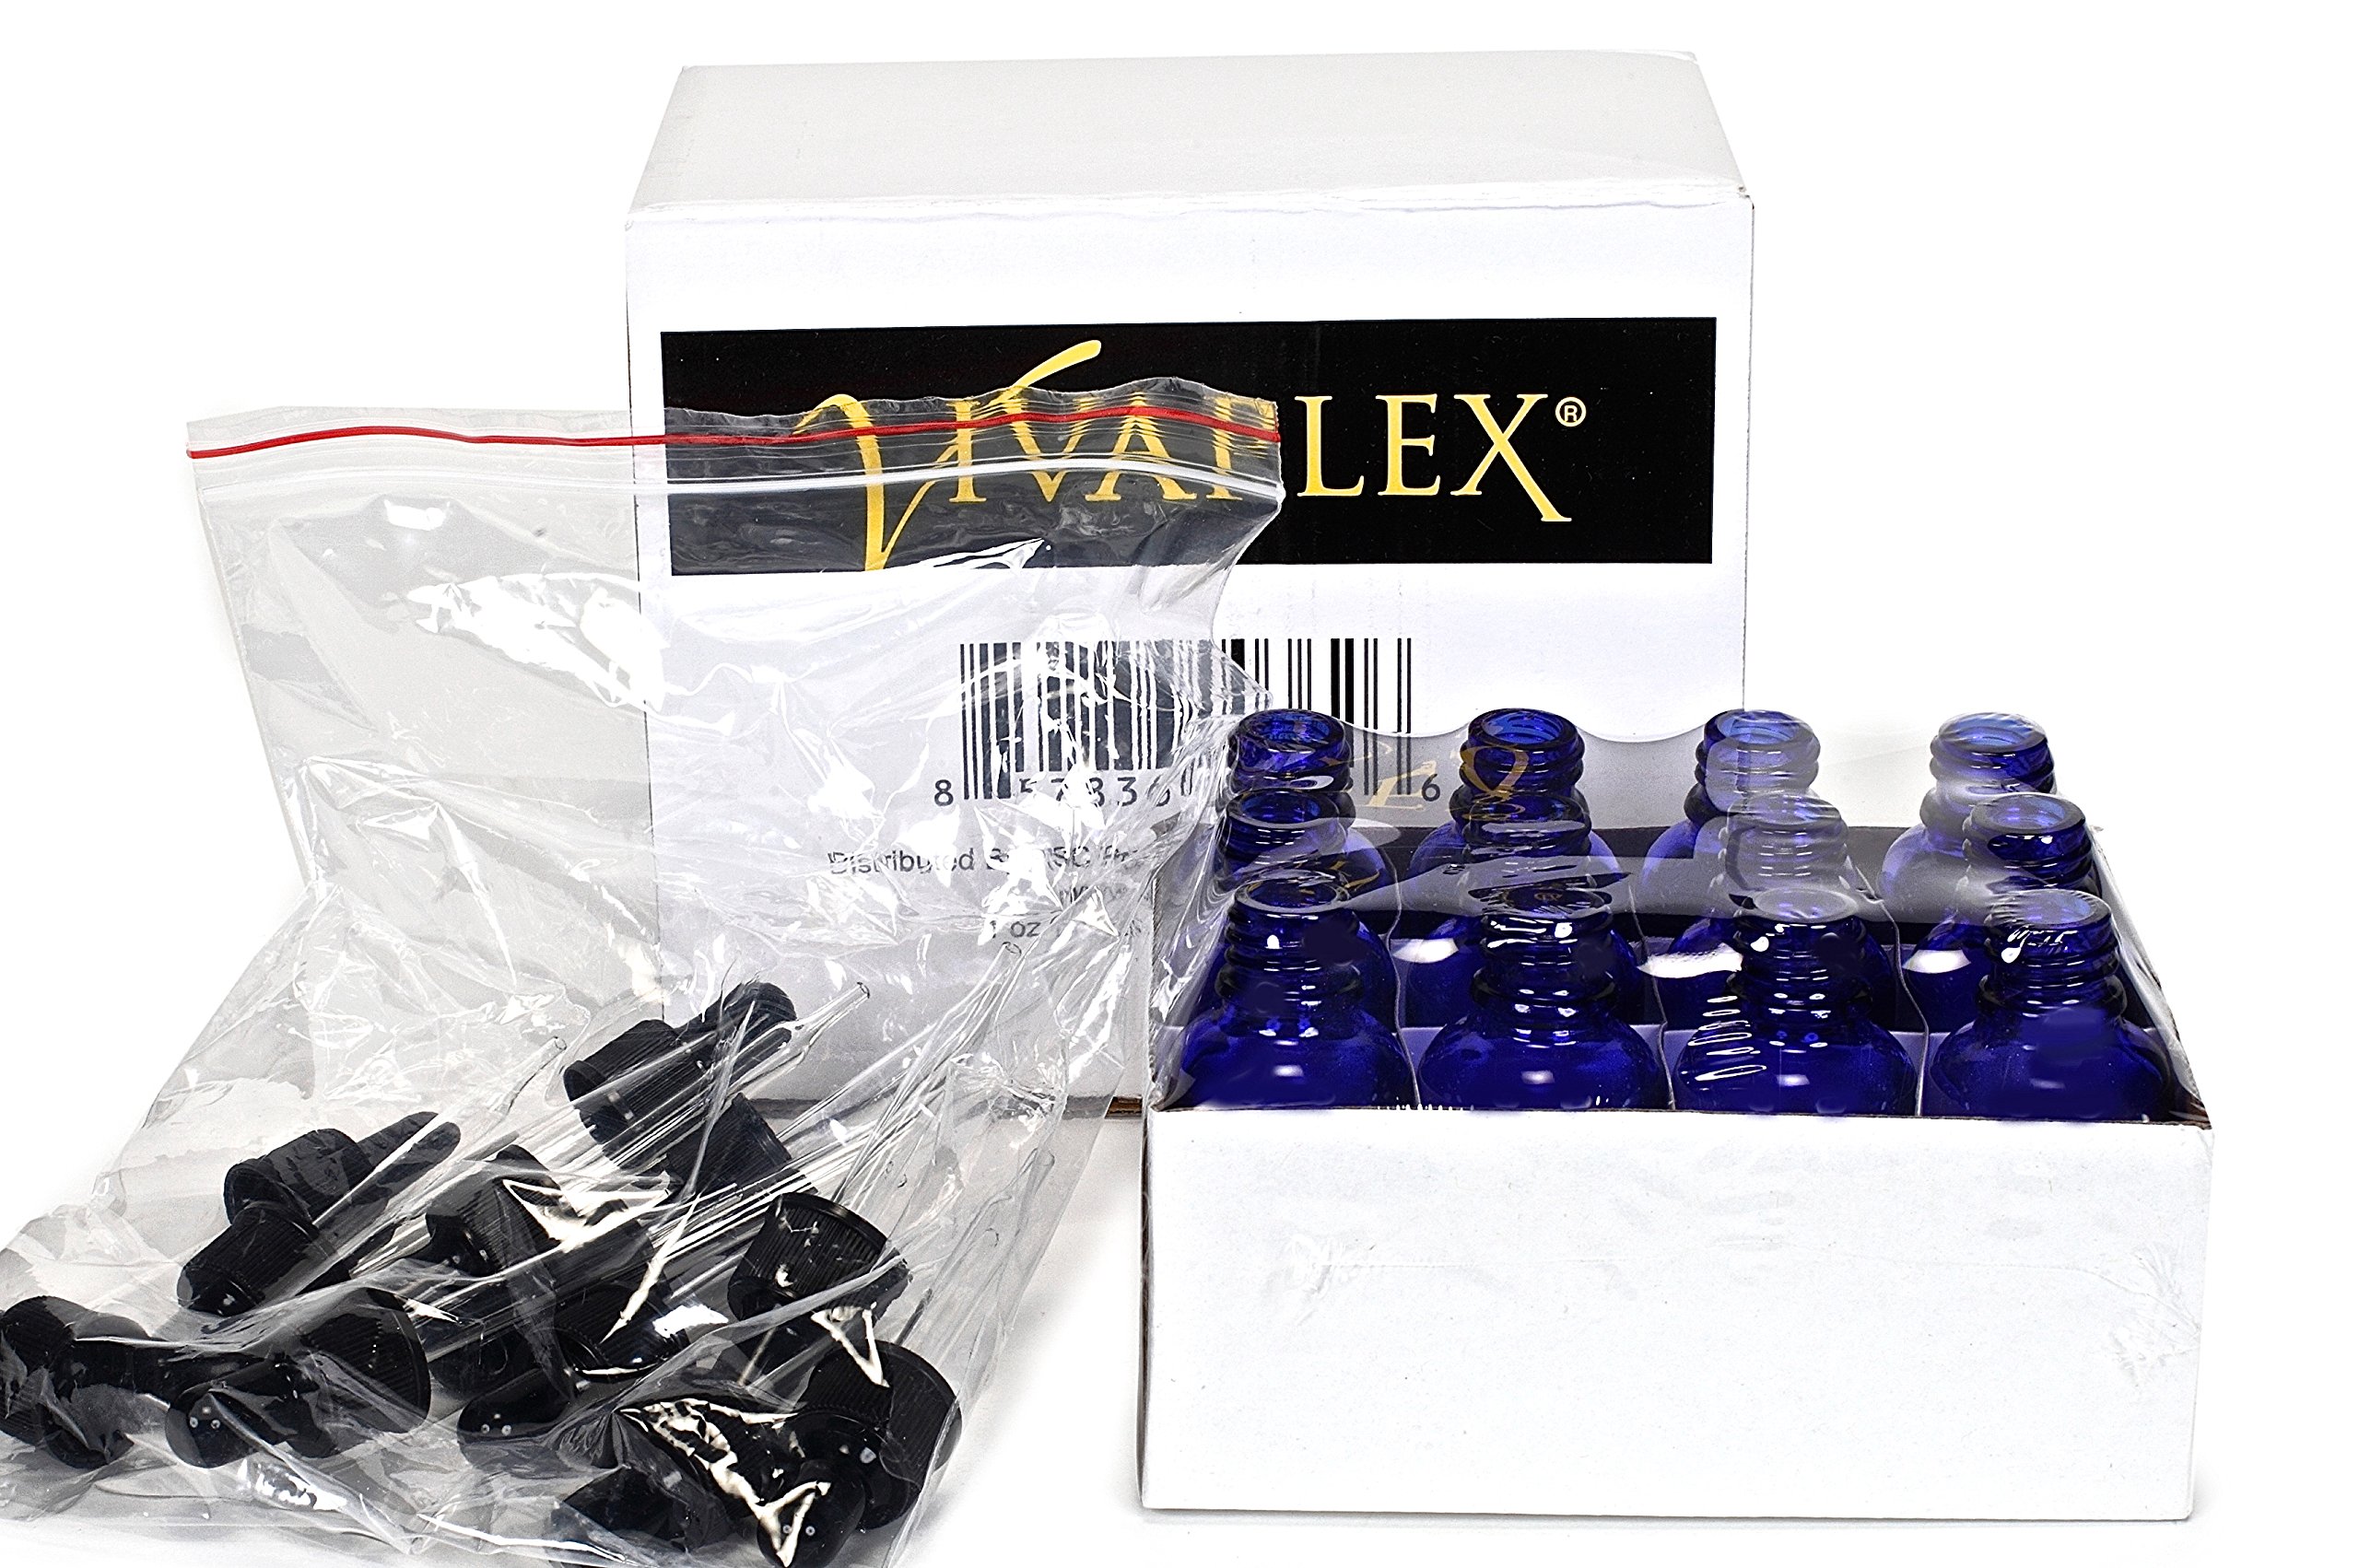 12, Cobalt Blue, 1 oz, Glass Bottles, with Glass Eye Droppers